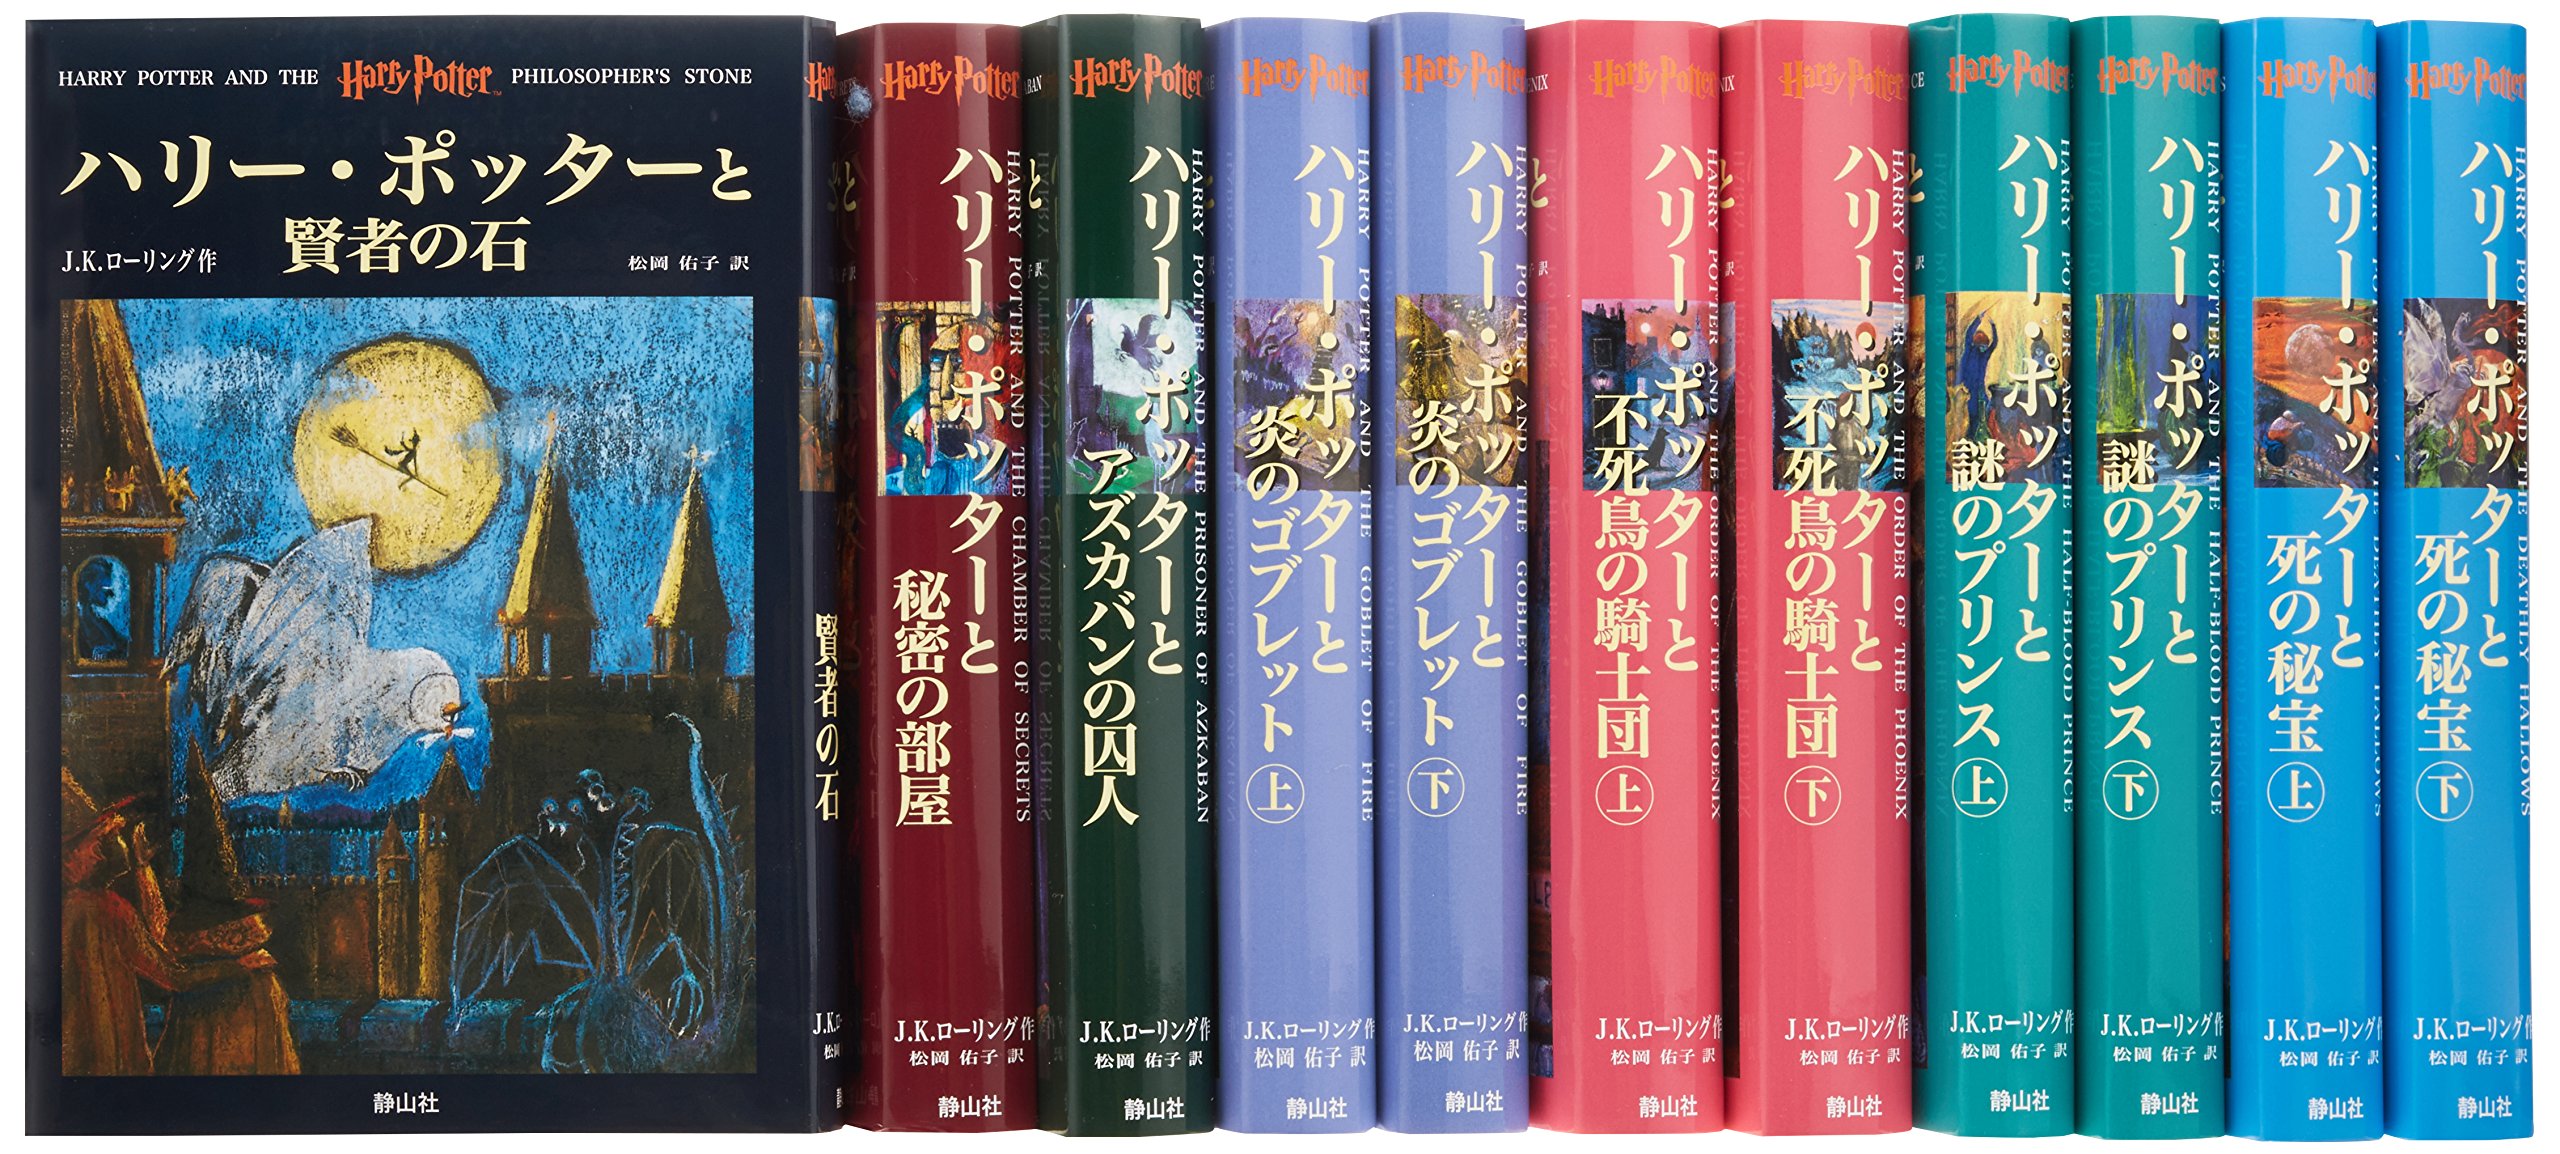 Harry Potter and the Order of the Phoenix (1 & 2) | Hép Bookstore